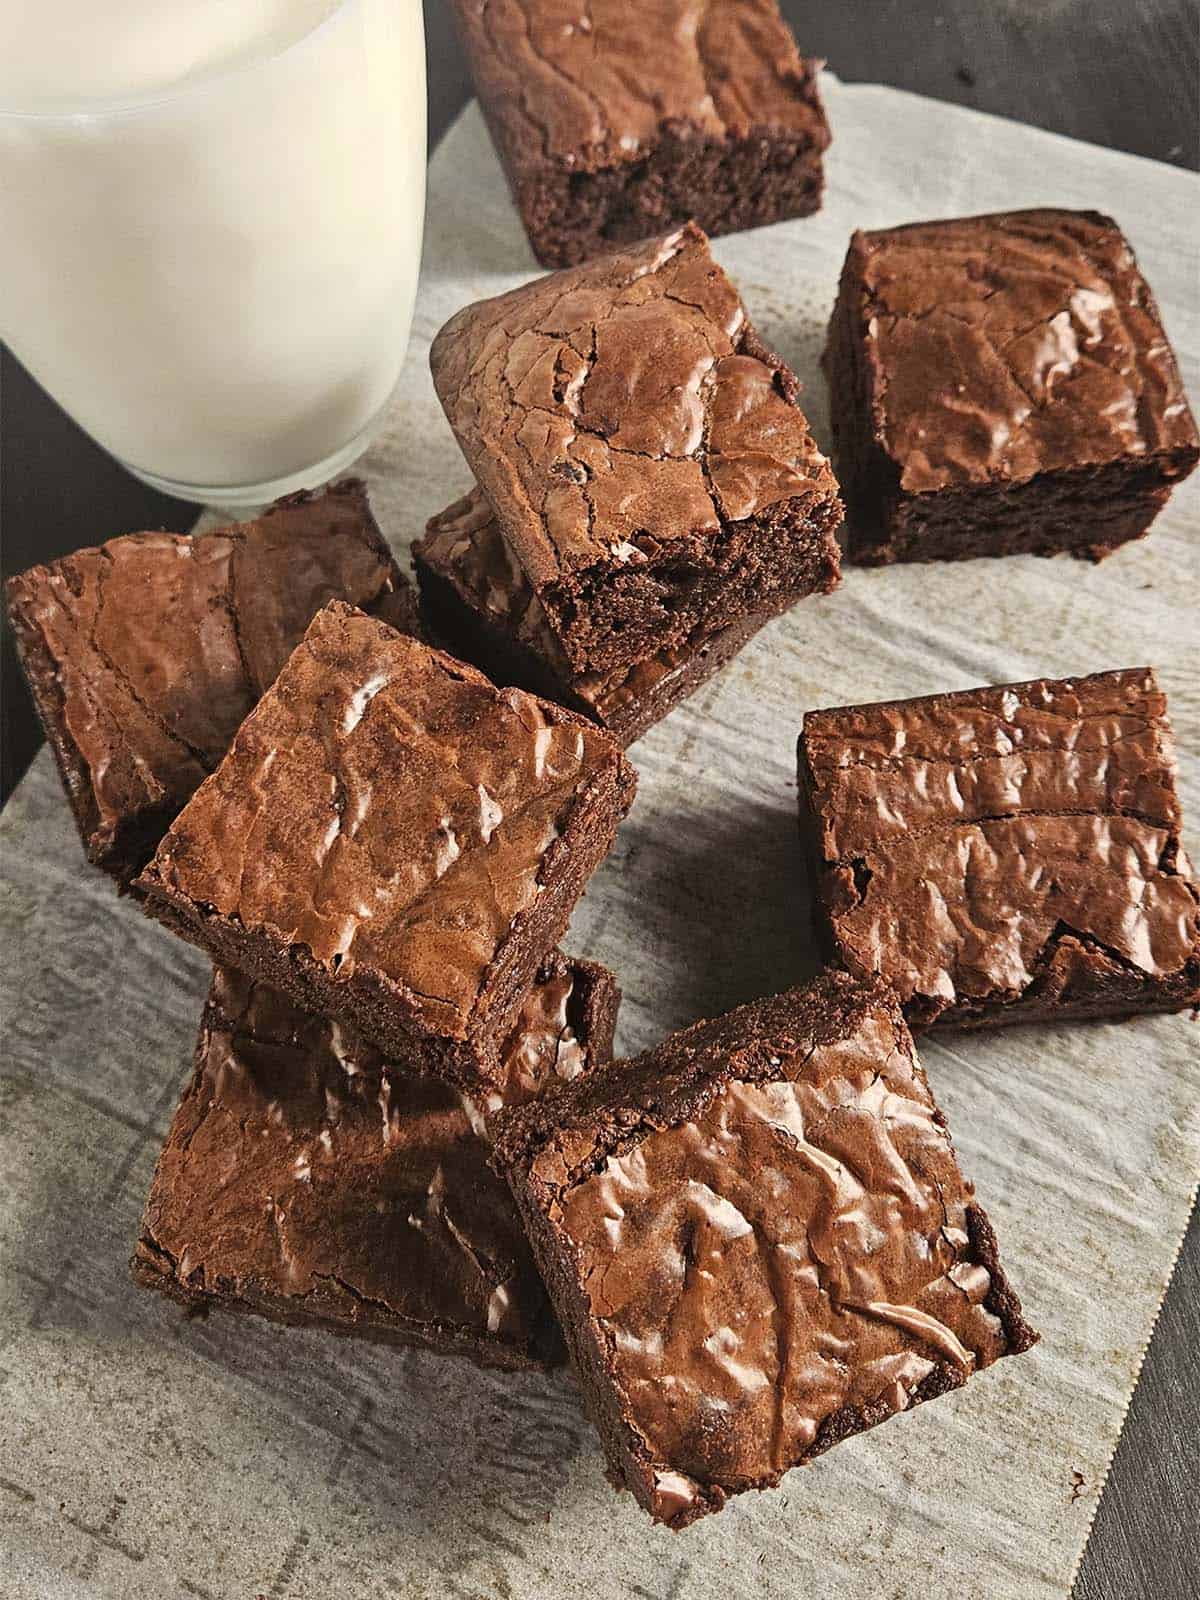 Brownies stacked on parchment paper next to a glass of milk.